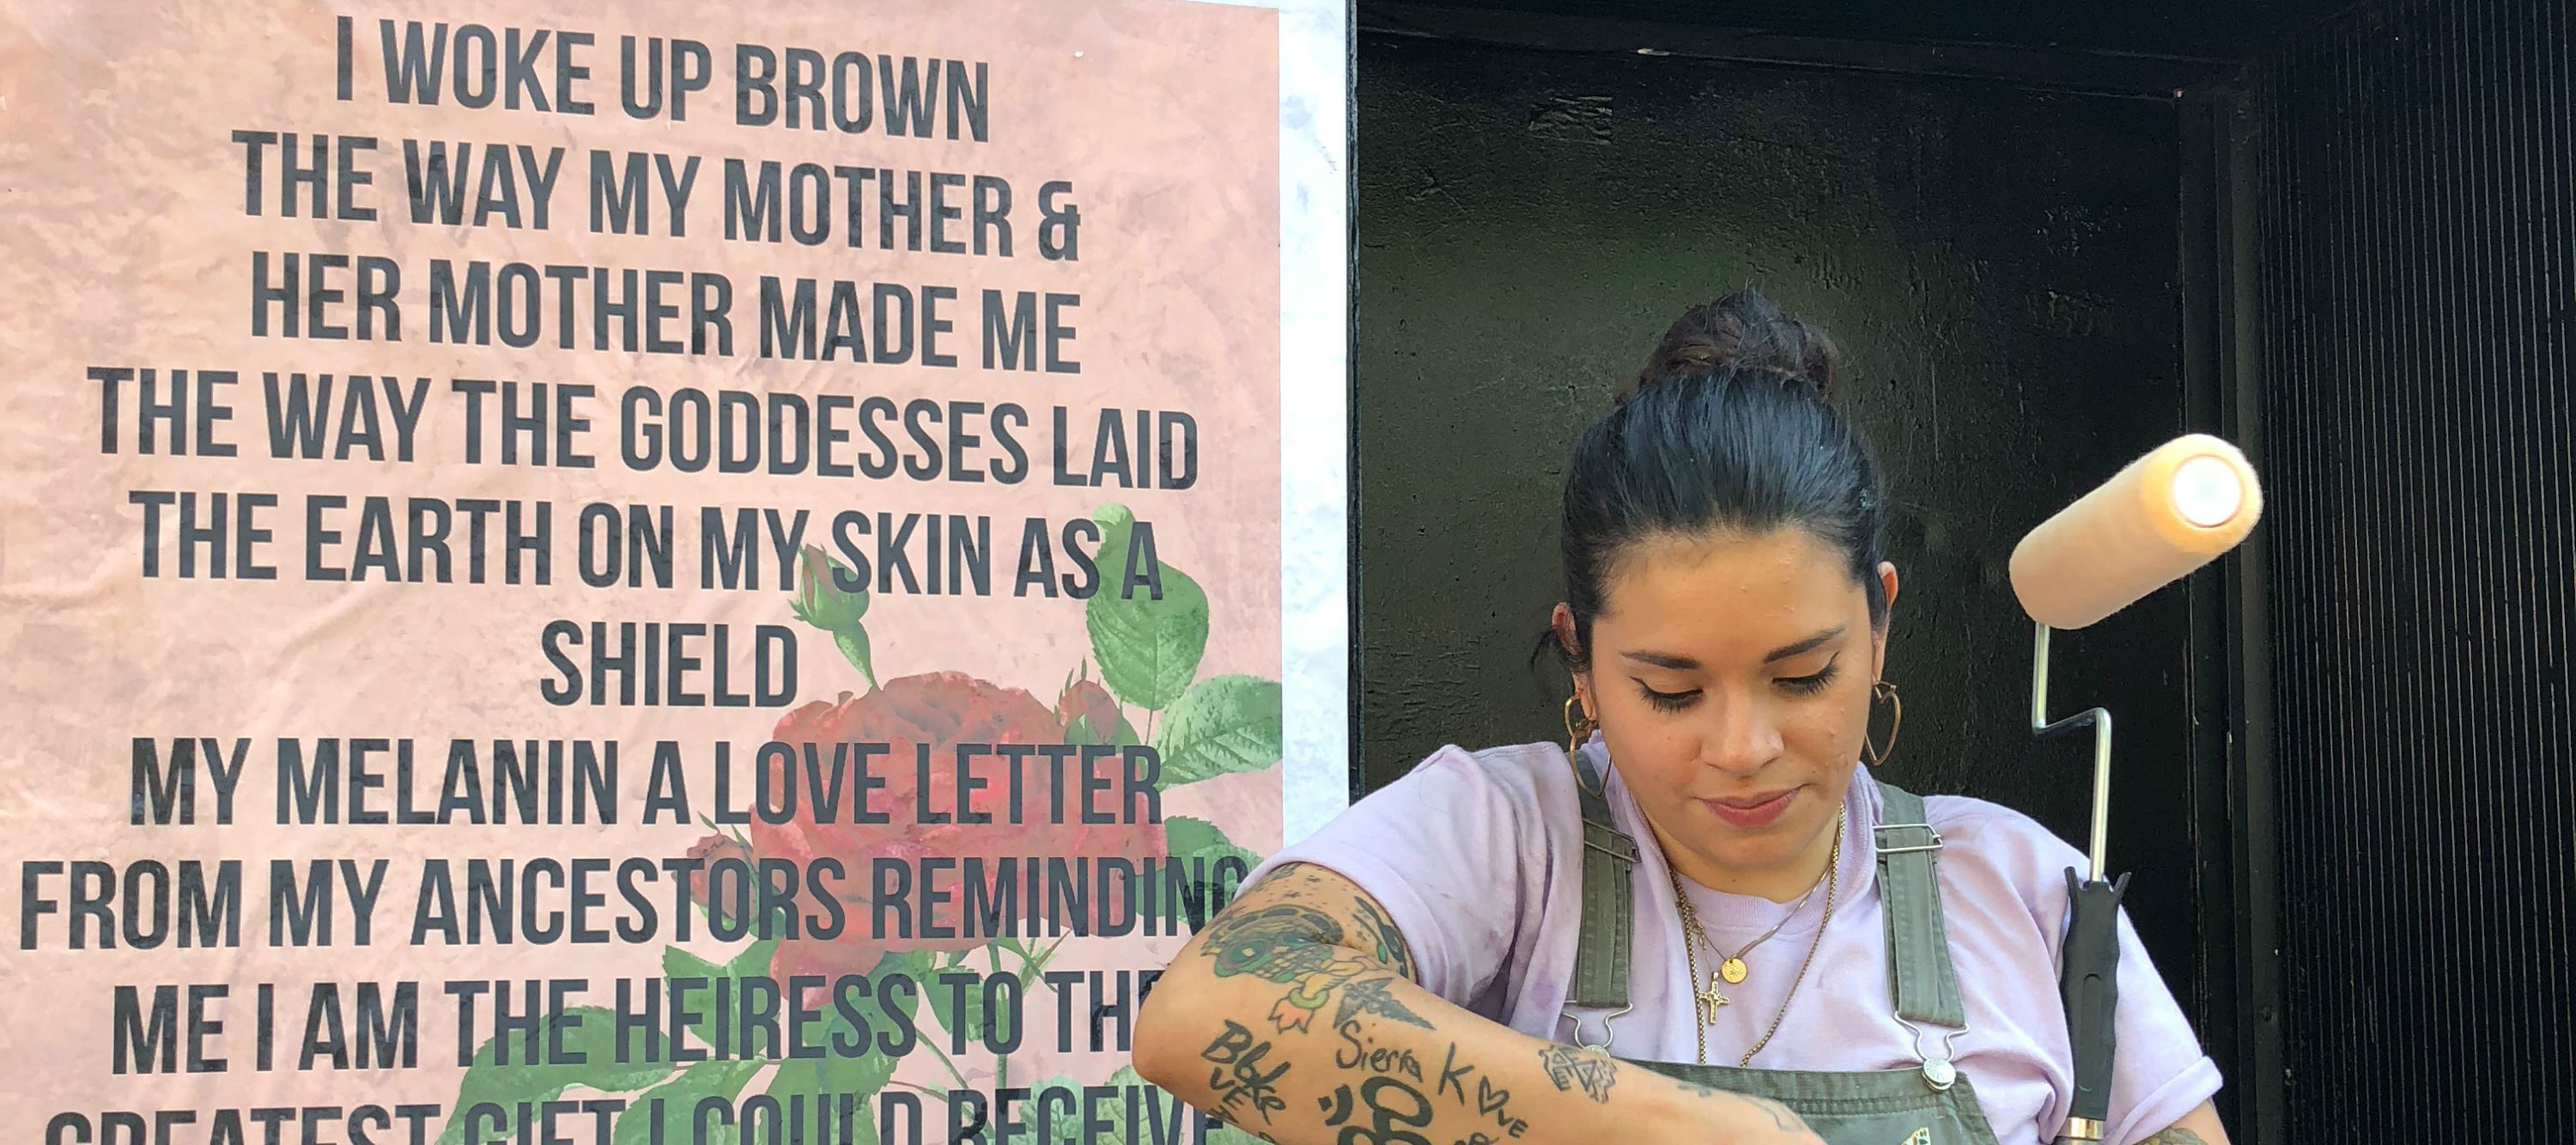 A woman holds a paint roller and looks down, her hands at work; She stands next to a wheat paste mural that features bold black text overlaid on a peach background that features a rose. The text reads: 